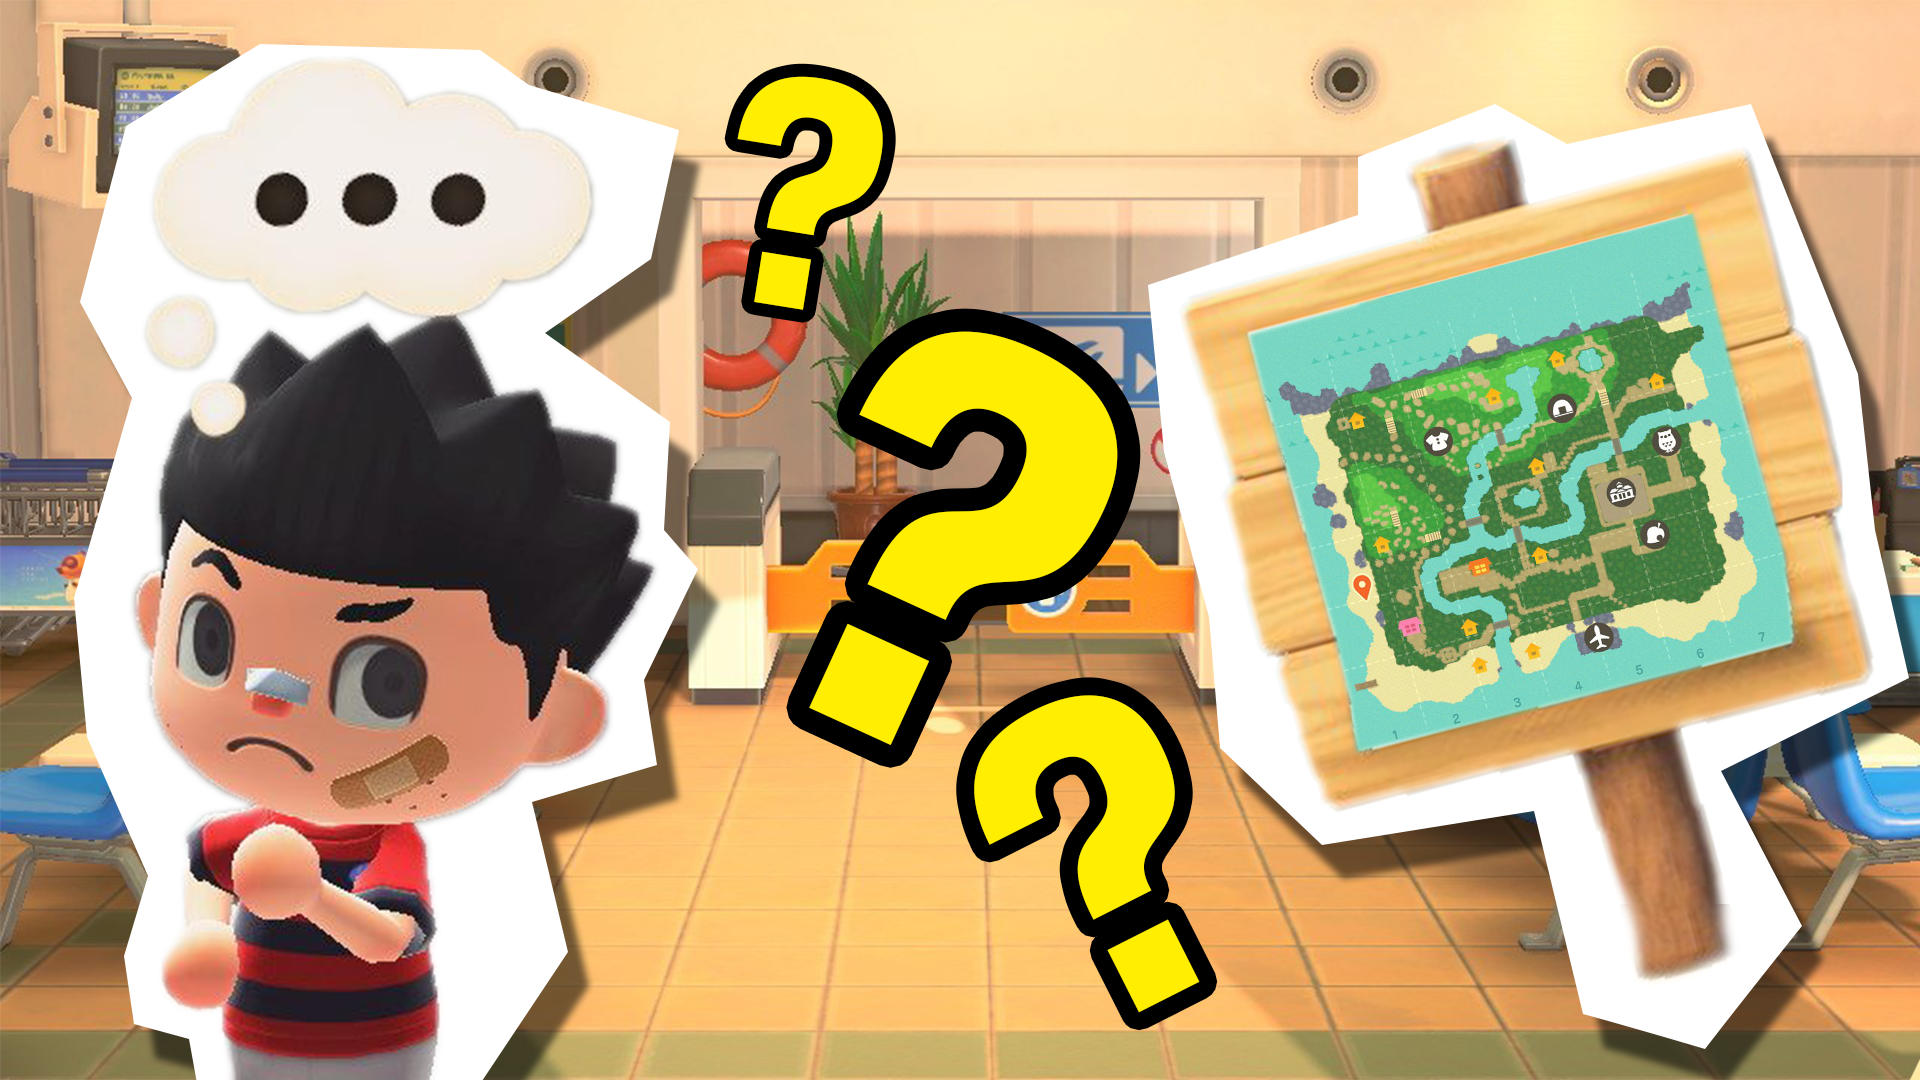 What should YOU Name your Animal Crossing Island?